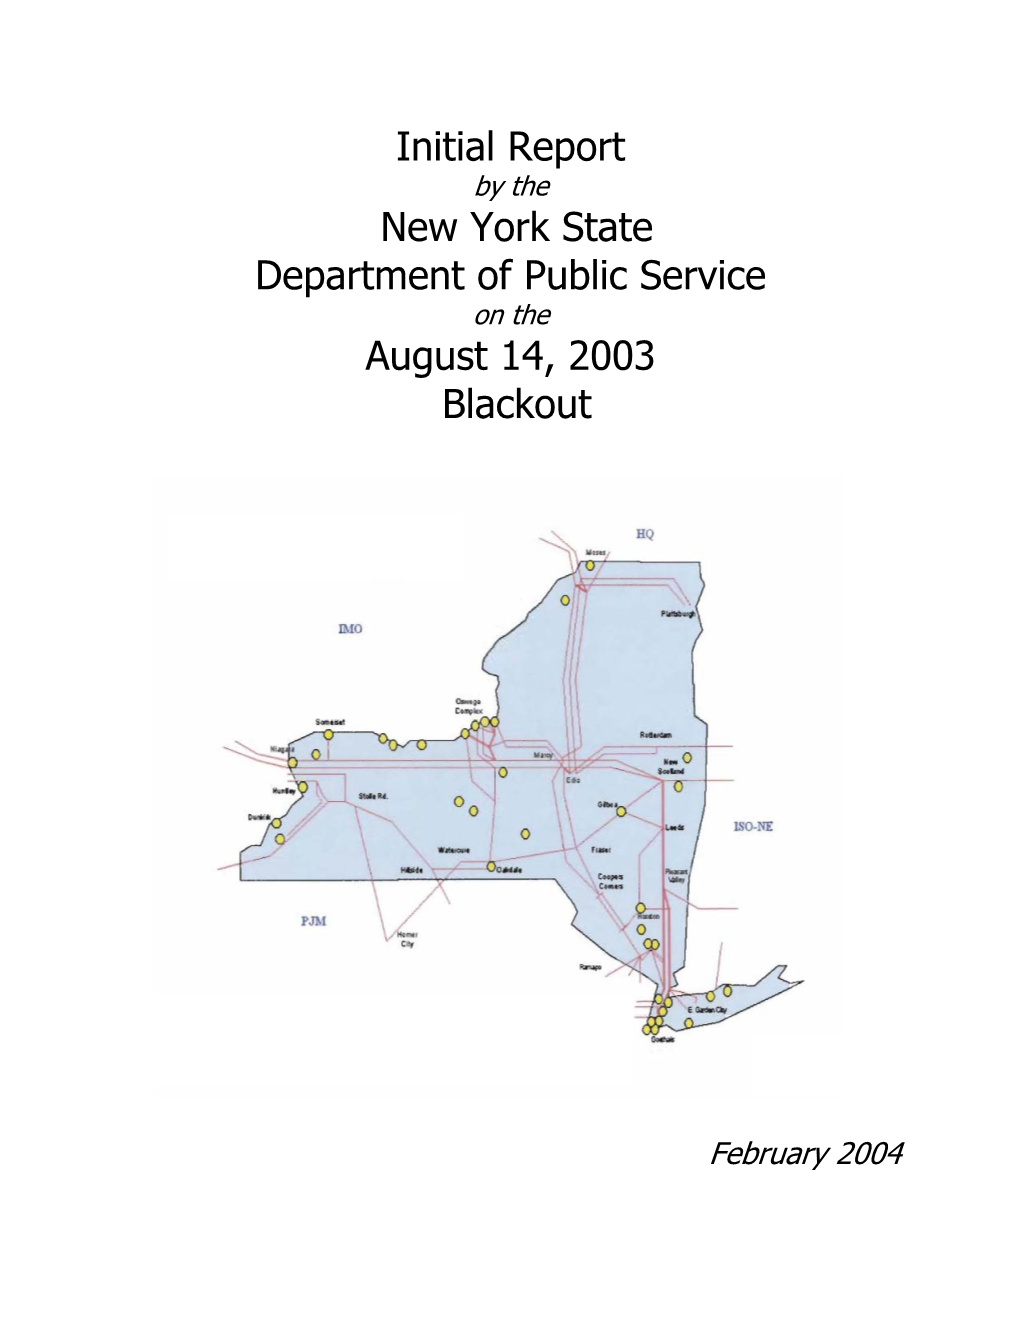 Initial Report by the New York State Department of Public Service on the August 14, 2003 Blackout